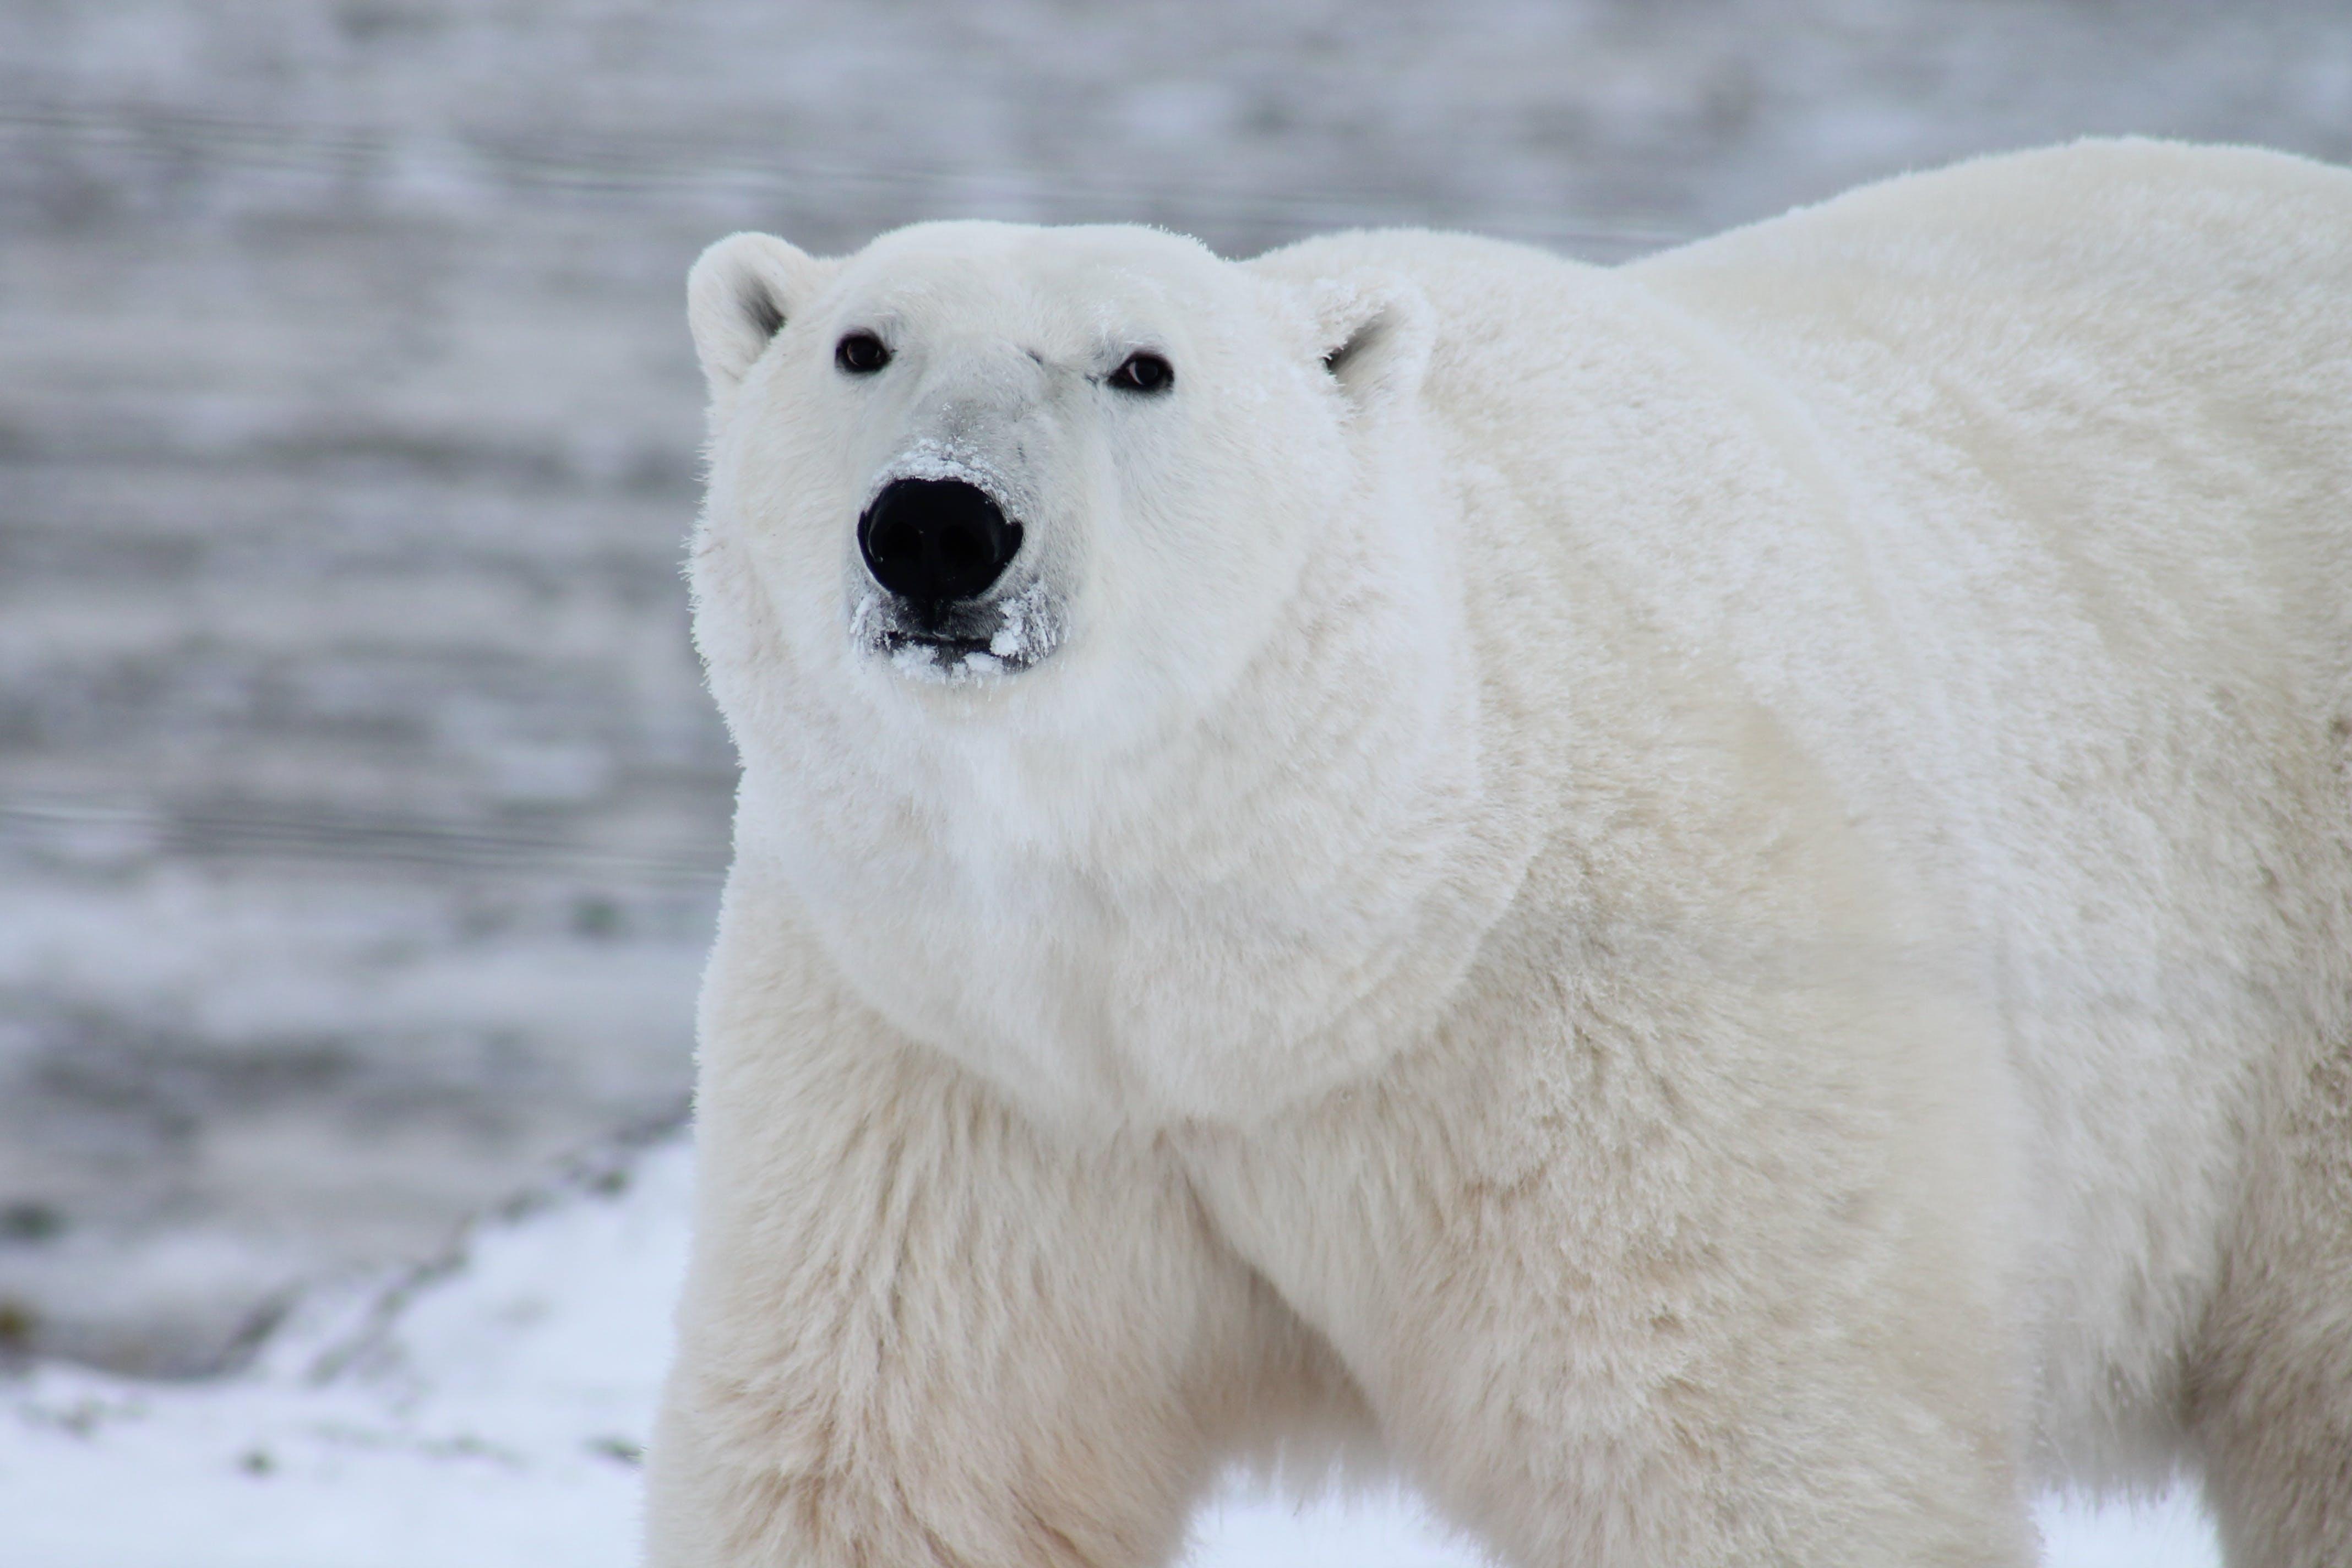 What are 5 interesting facts about polar bears? 